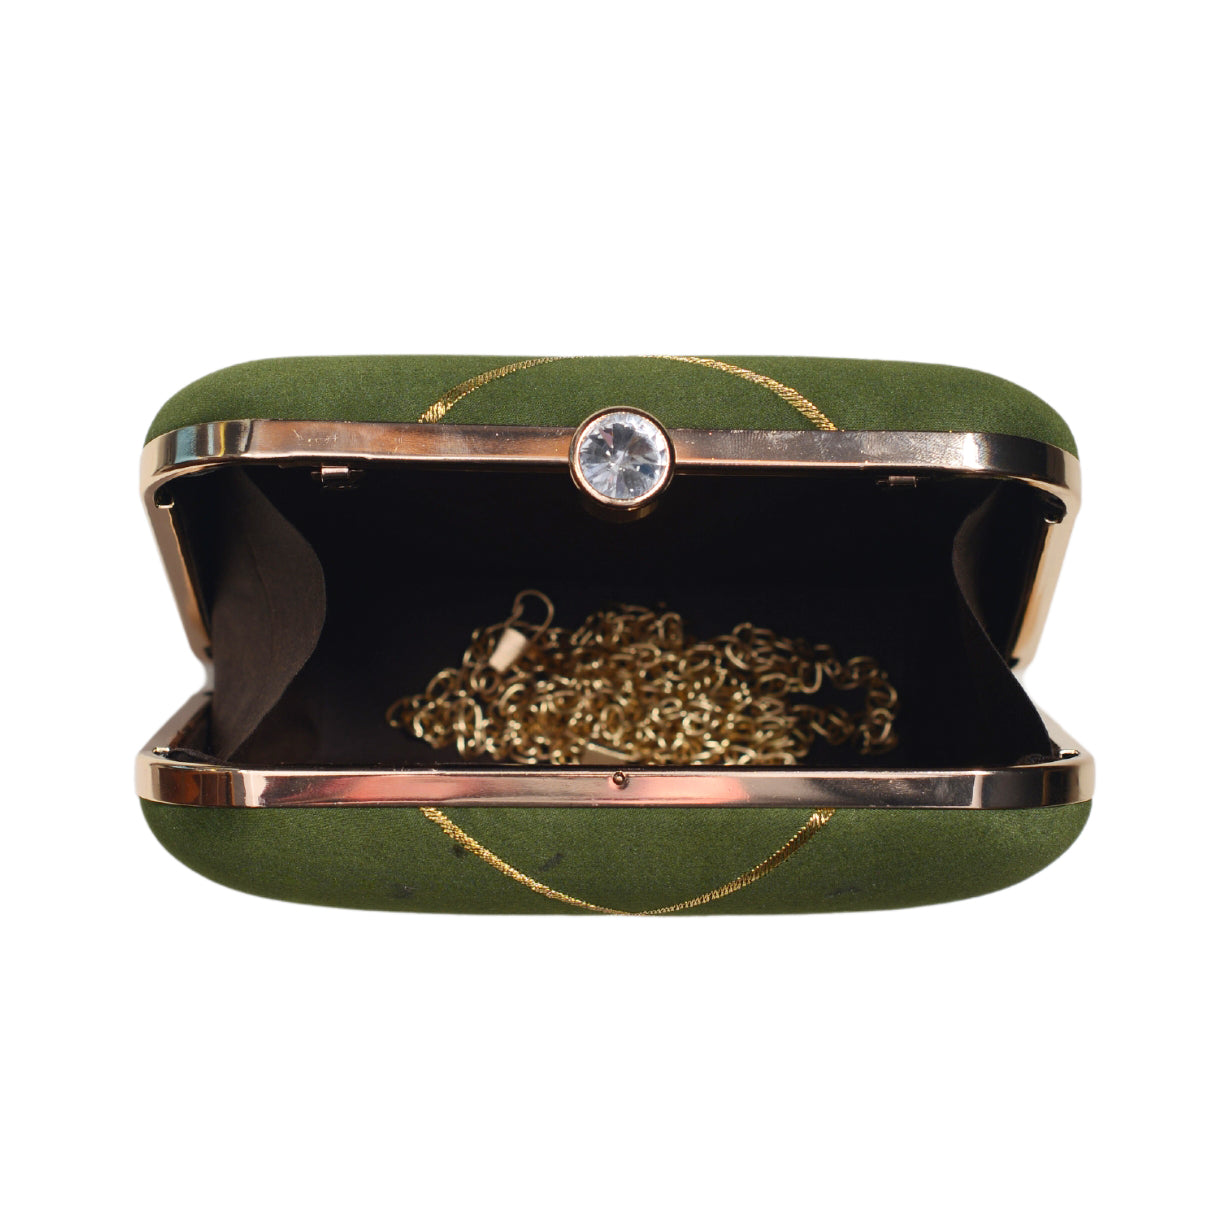 Olive Green And Golden Checks Embroidery Clutch